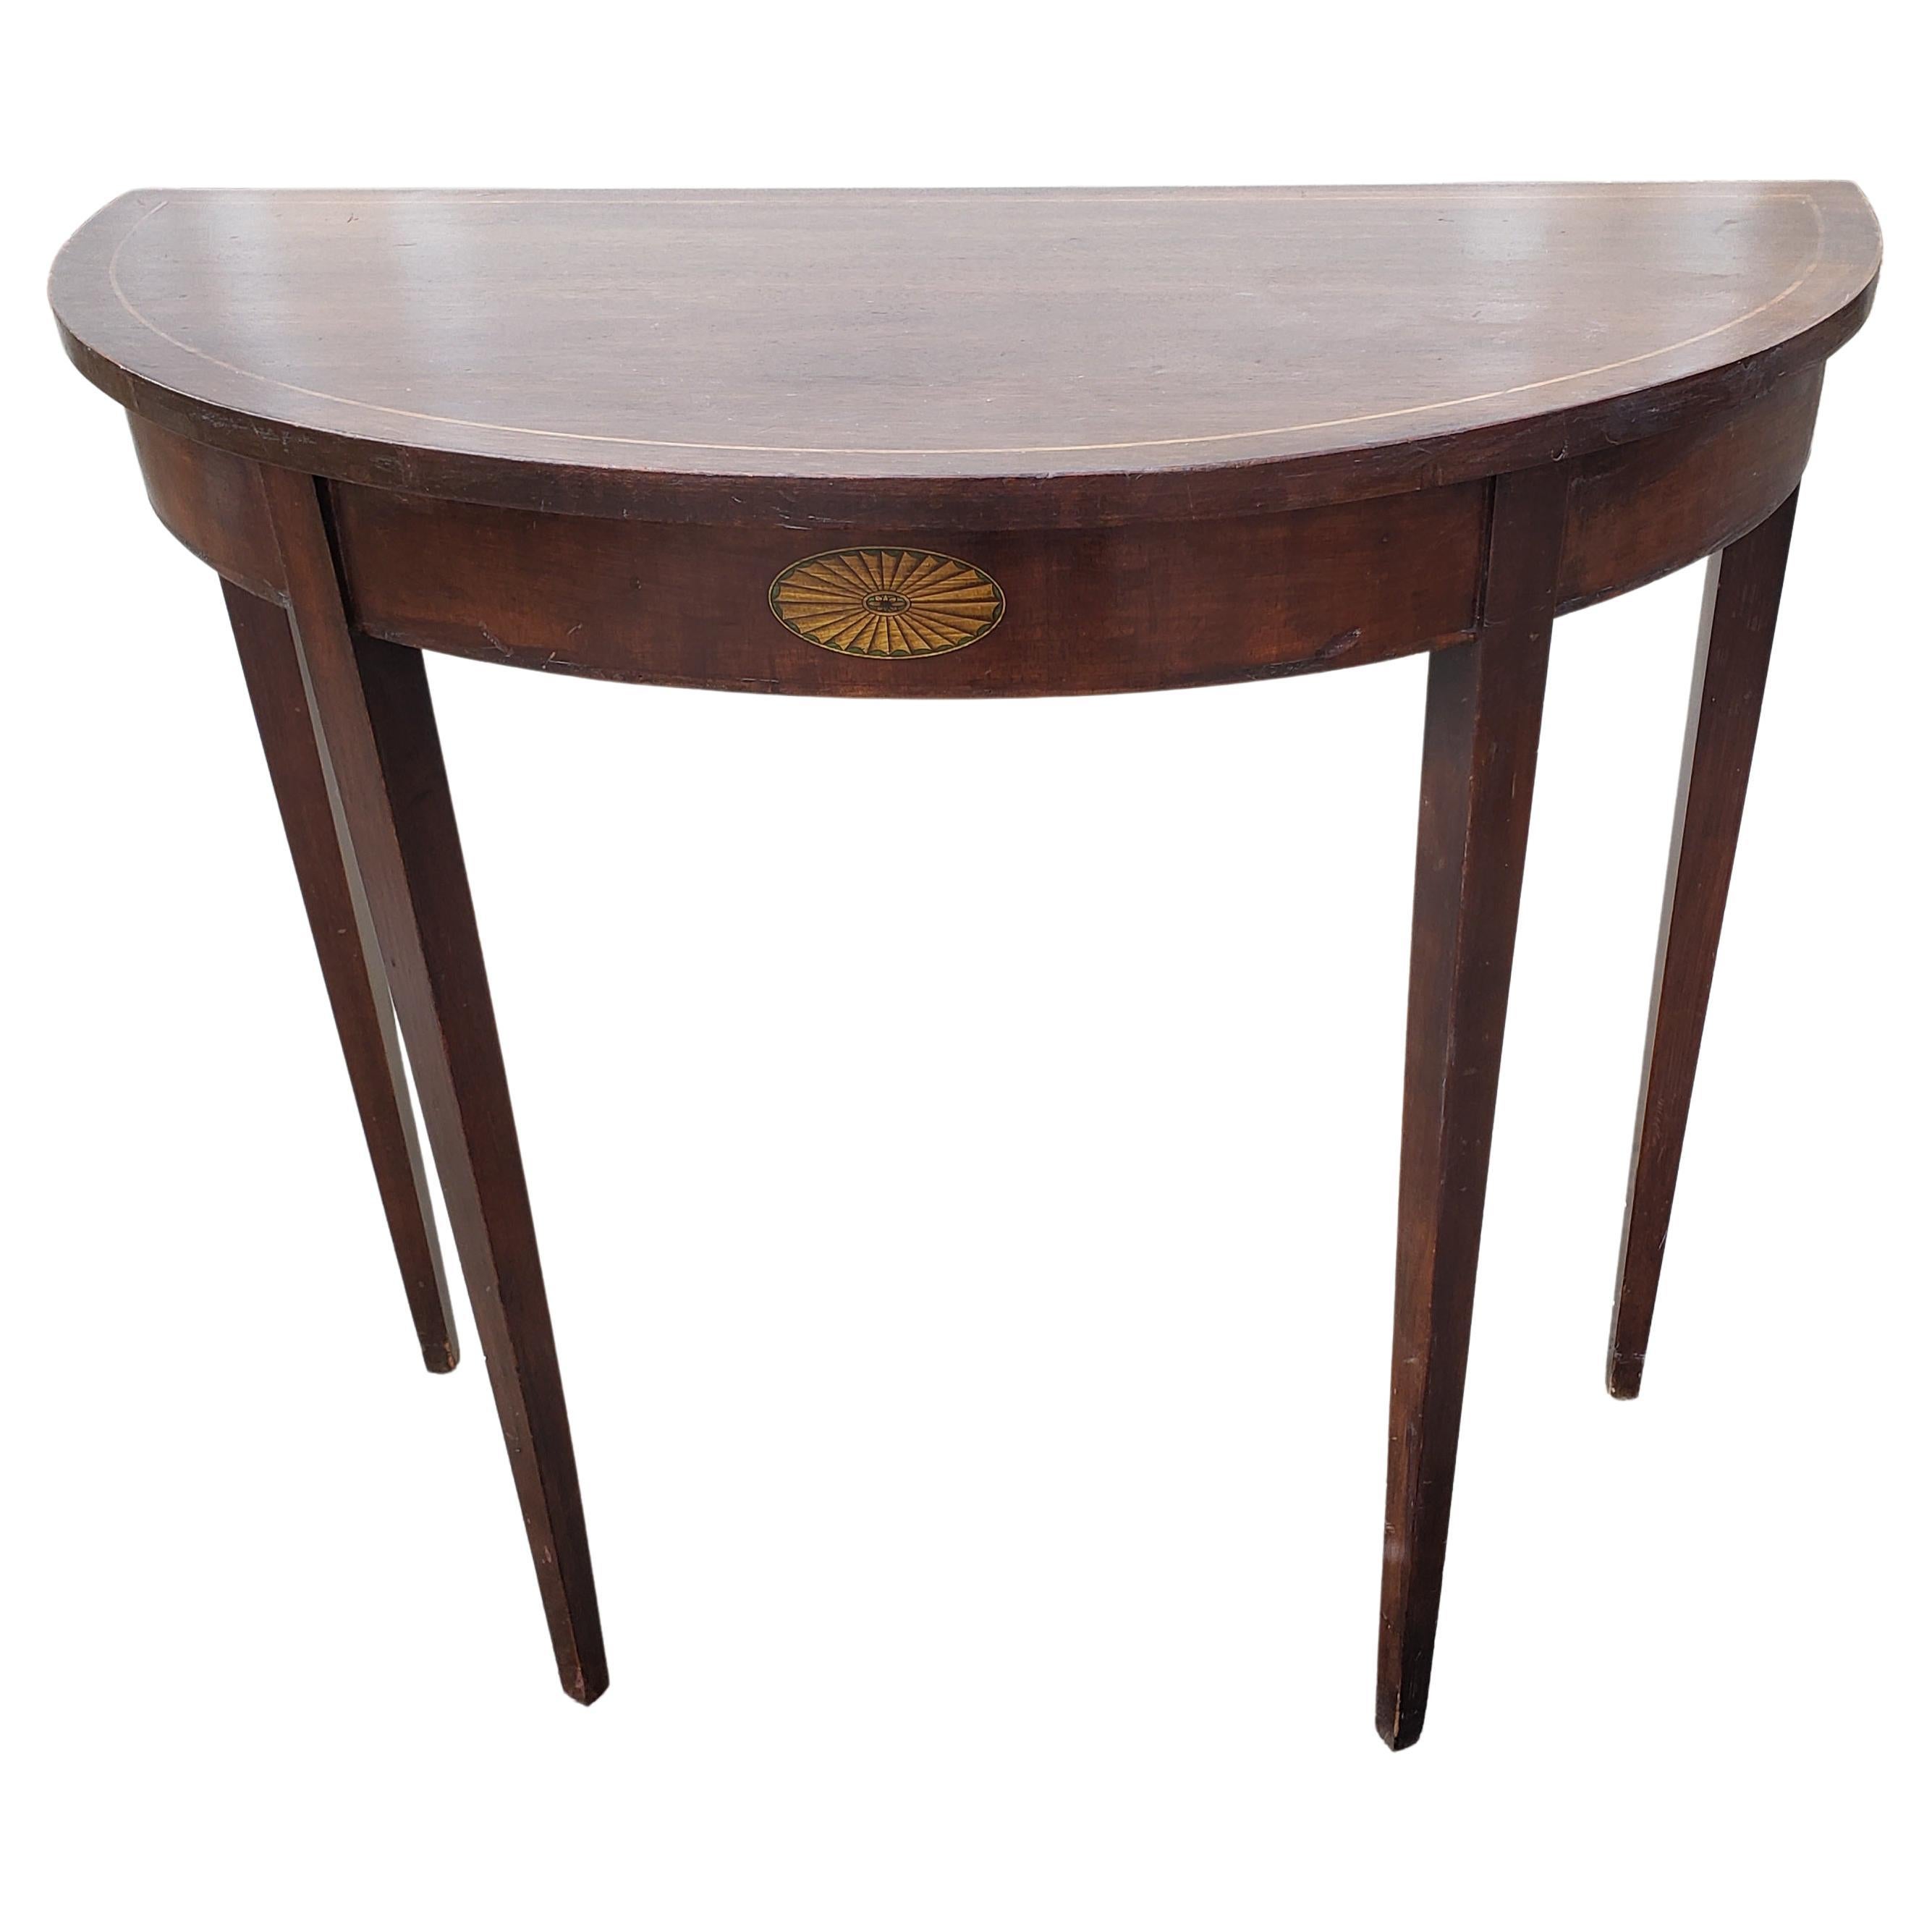 Solid Certified Genuine Mahogany inlaid Demi Lune table built in 1940s and certified by the famous Mahogany Association of the United States. Good vintage condition with some nicks consistent with age and use. 
Measures 34 inches in width, 16